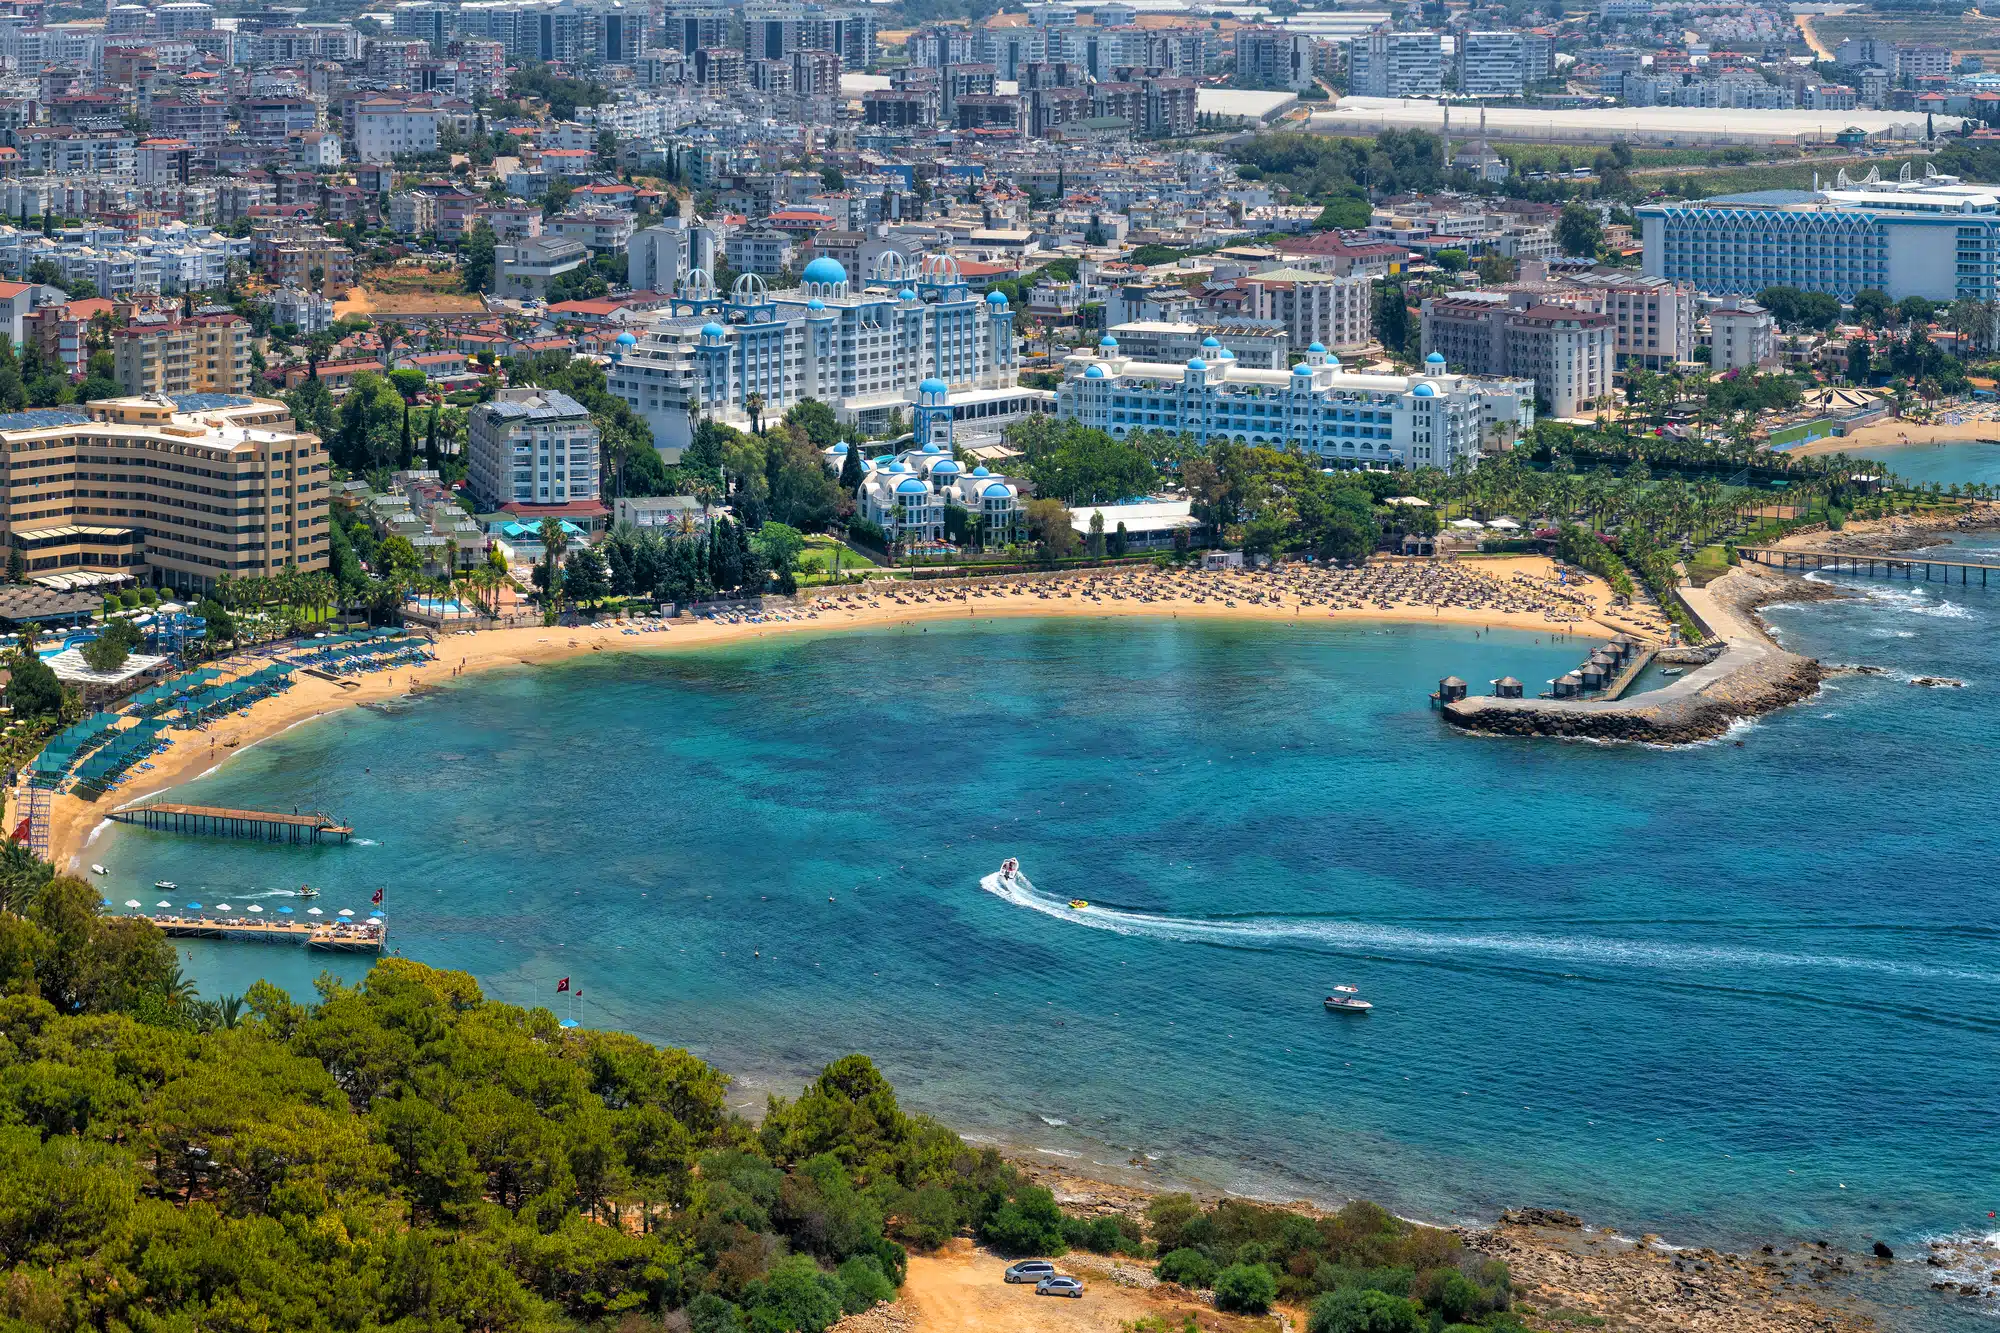 A picturesque Alanya bay with beaches and hotels in the Avsallar region of the Turkish resort